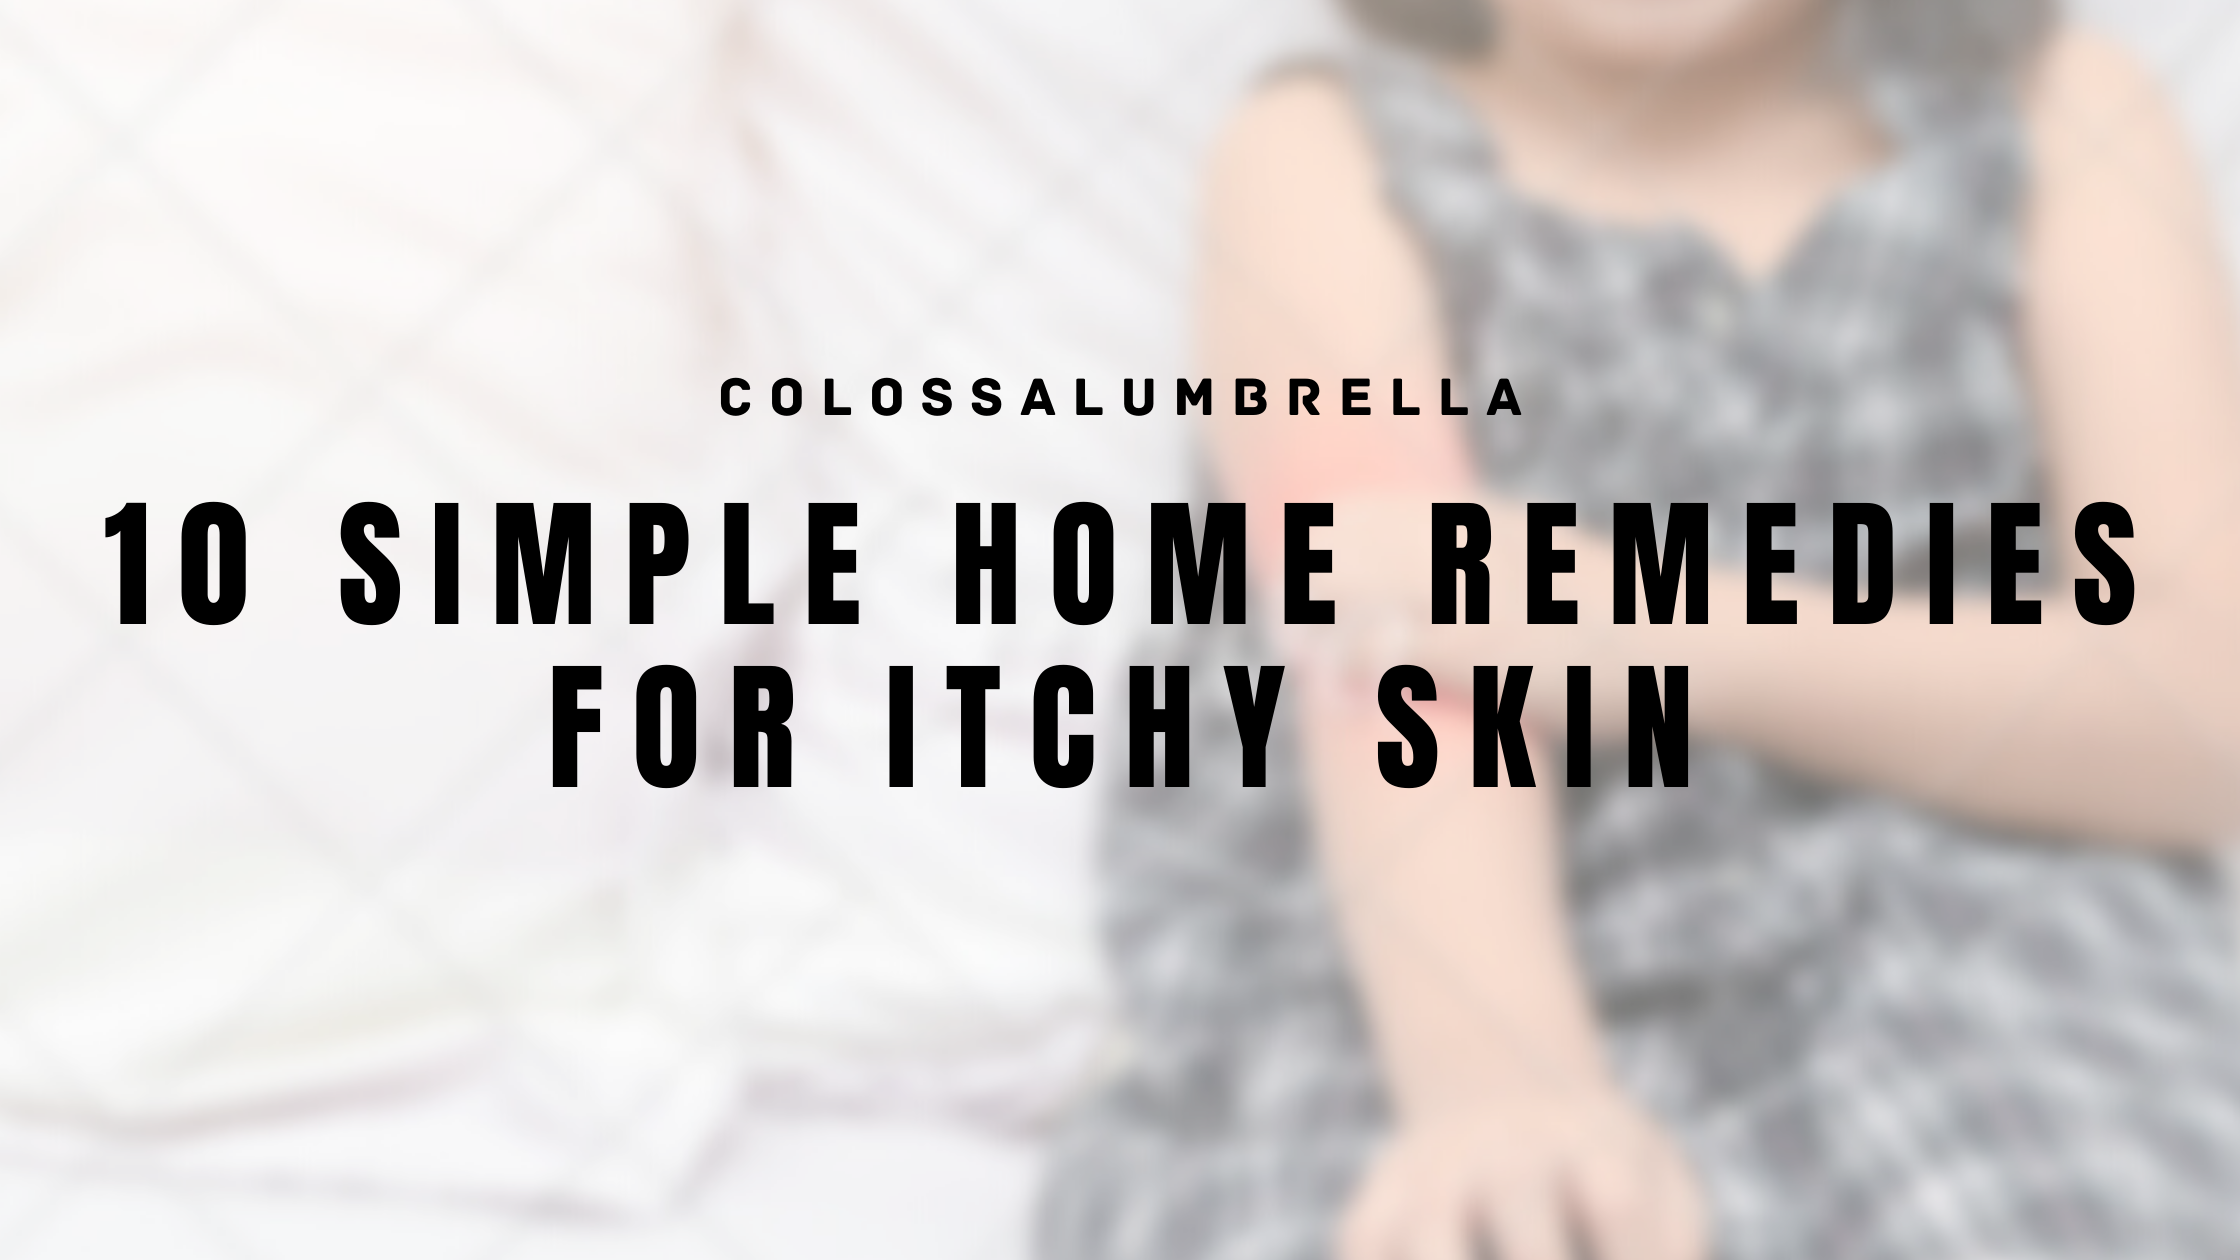 10 Simple home remedies for itchy skin